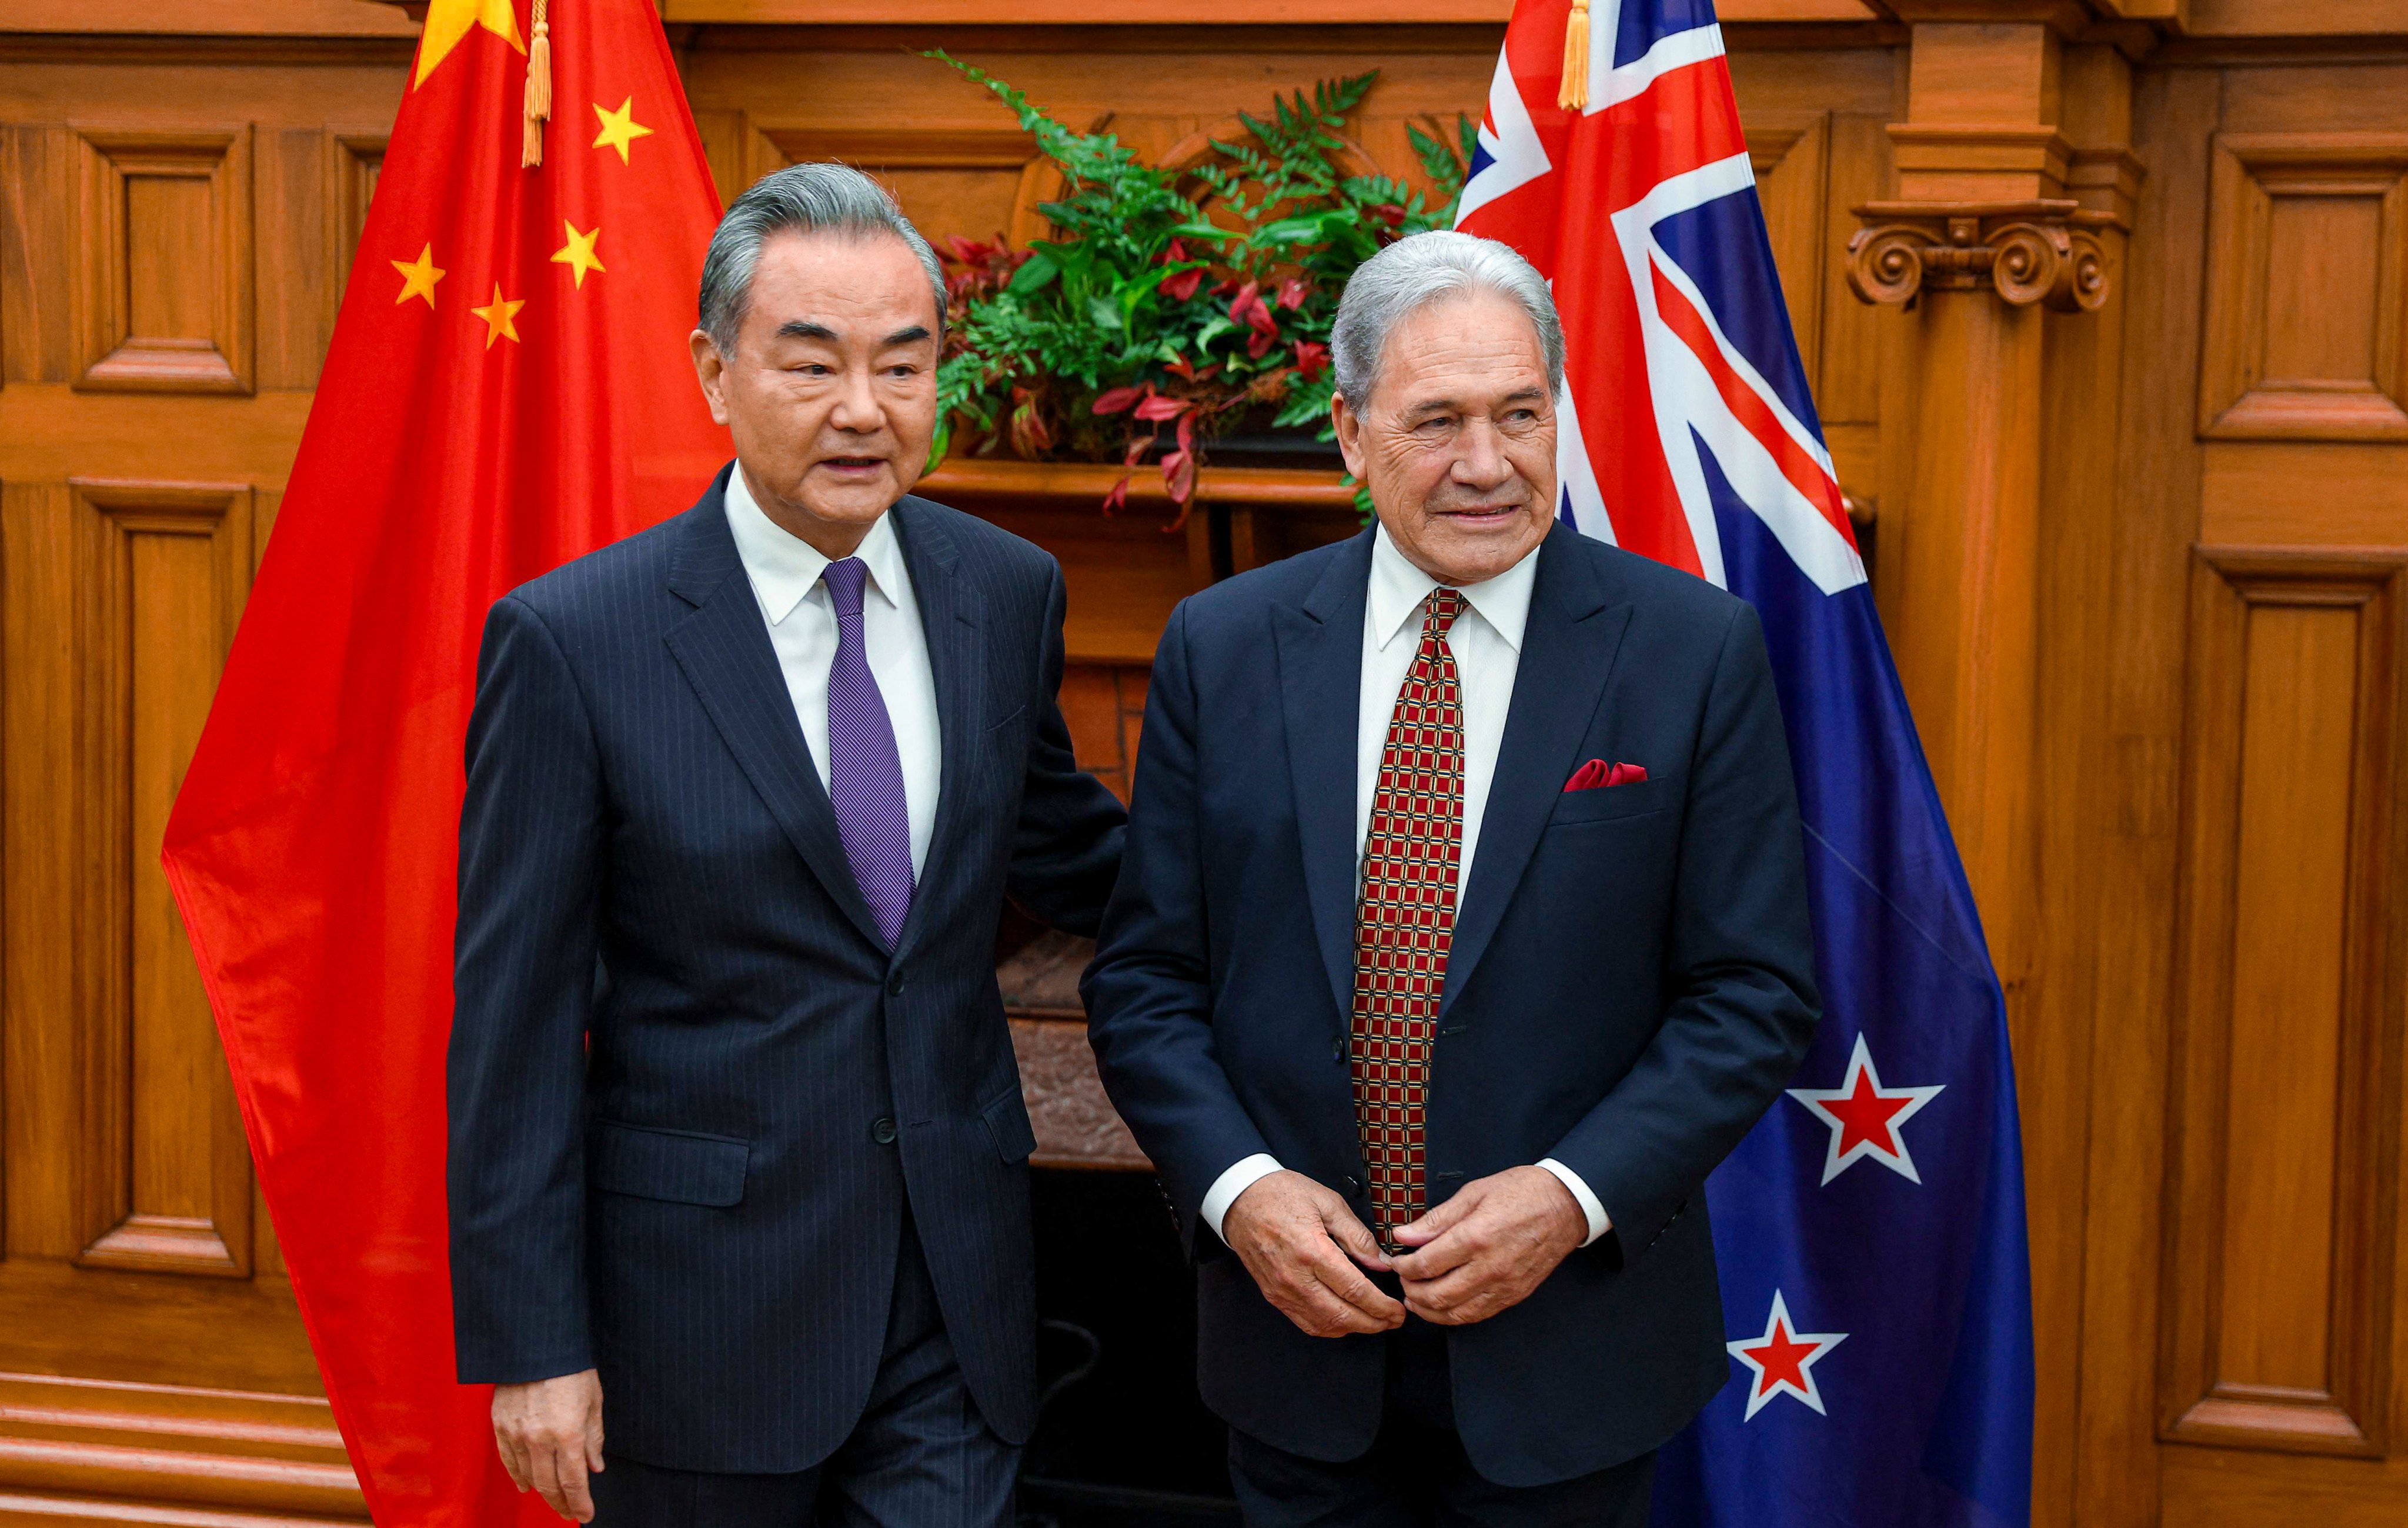 New Zealand Minister of Foreign Affairs Winston Peters (right) and Chinese Foreign Minister Wang Yi met in Wellington in March. Photo: AFP